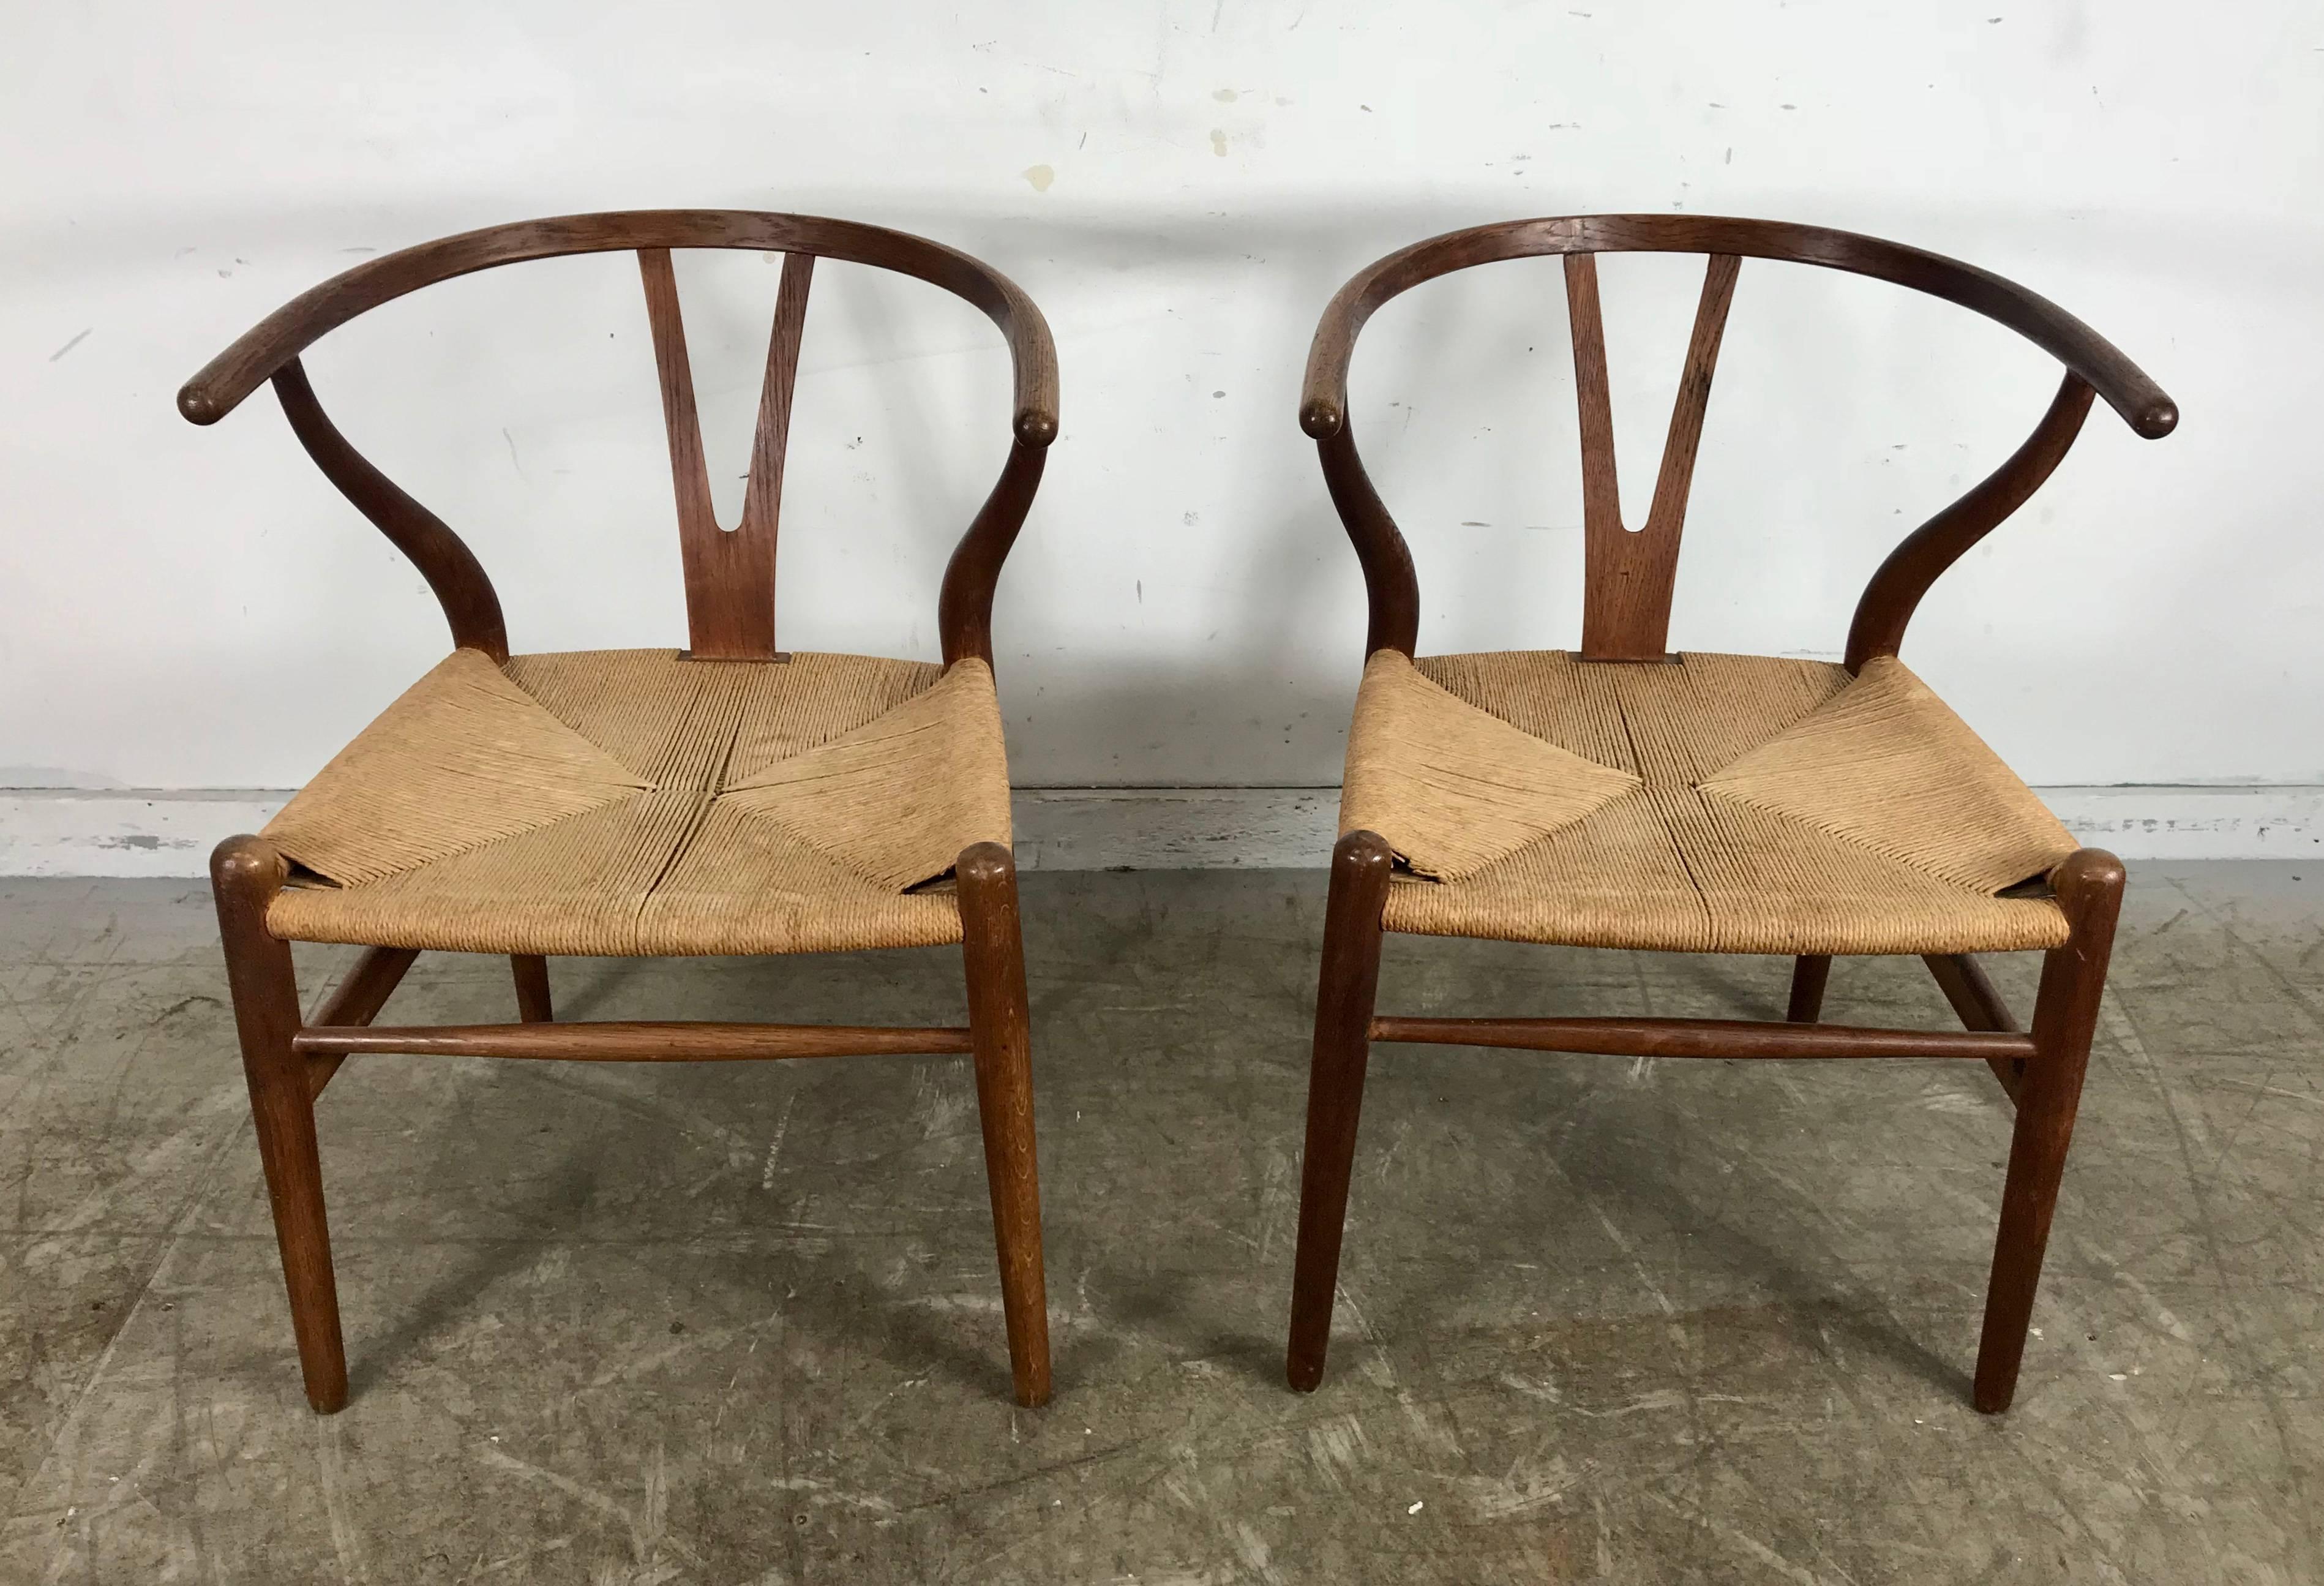 Early pair of Danish modern wishbone chairs CH24 in oak. Wonderful original condition, amazing color, surface and patina.